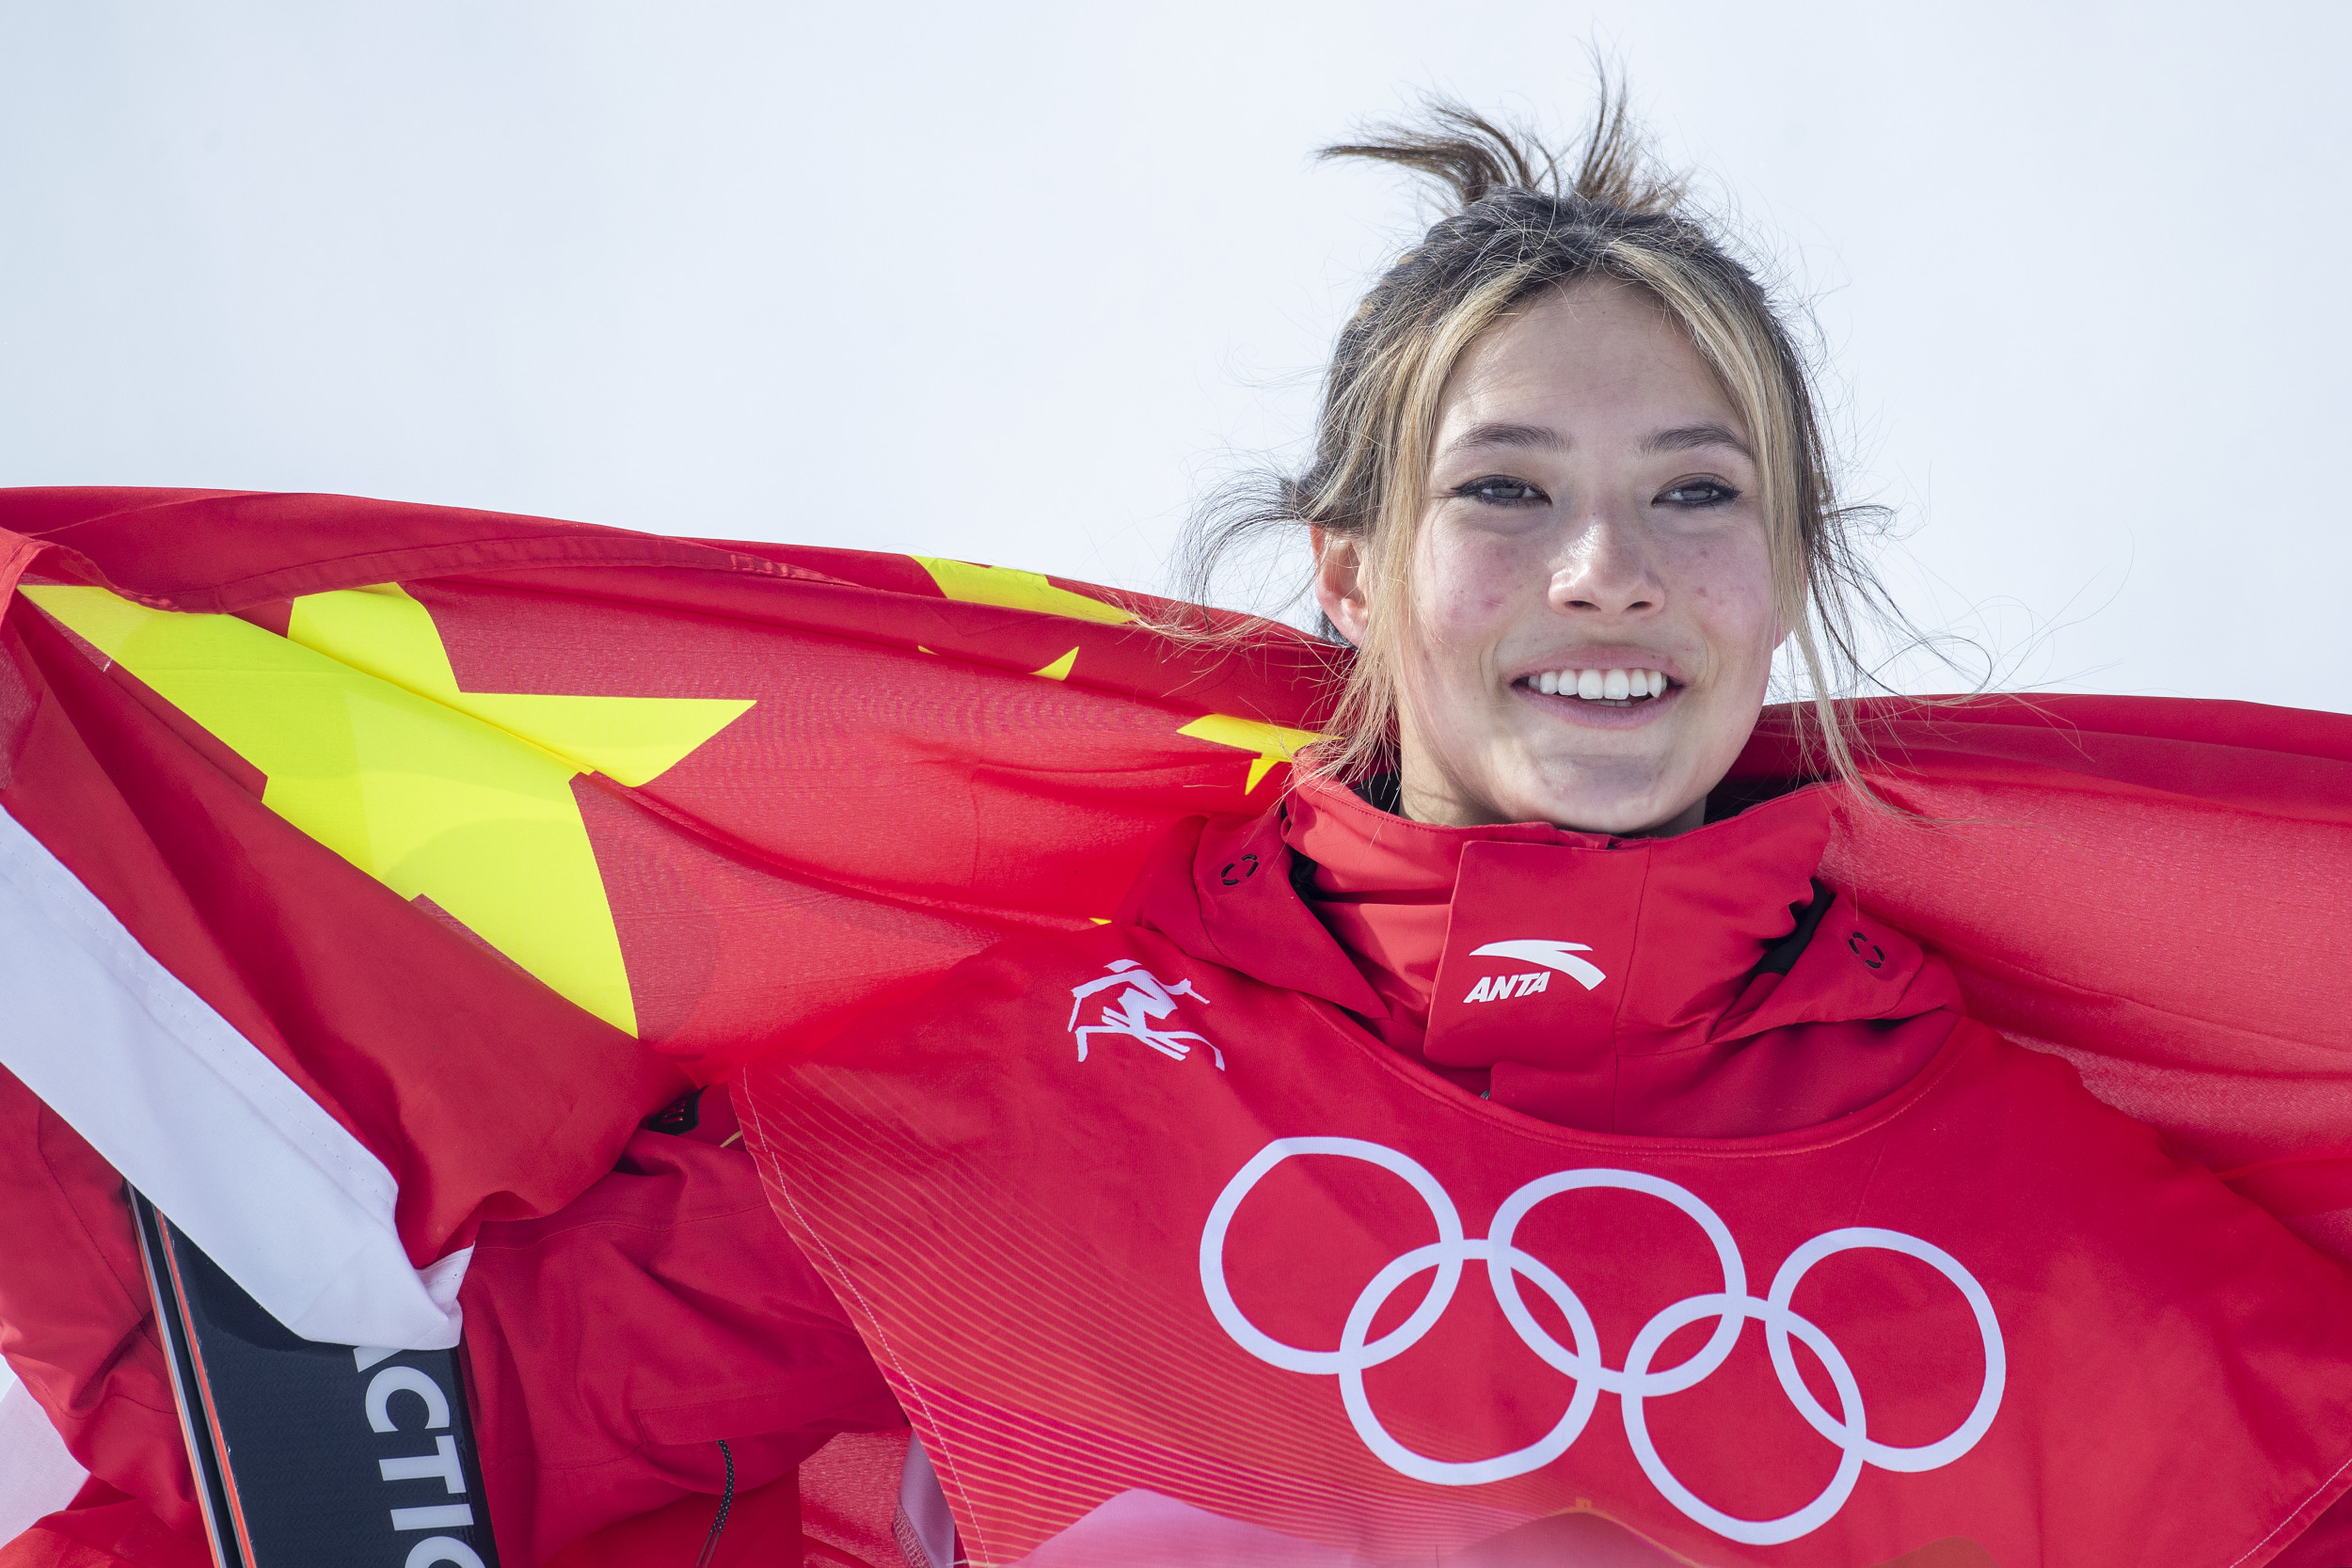 Winter Olympics 2022: Freestyle skier Eileen Gu causes controversy by  competing for China despite being born in US, US News